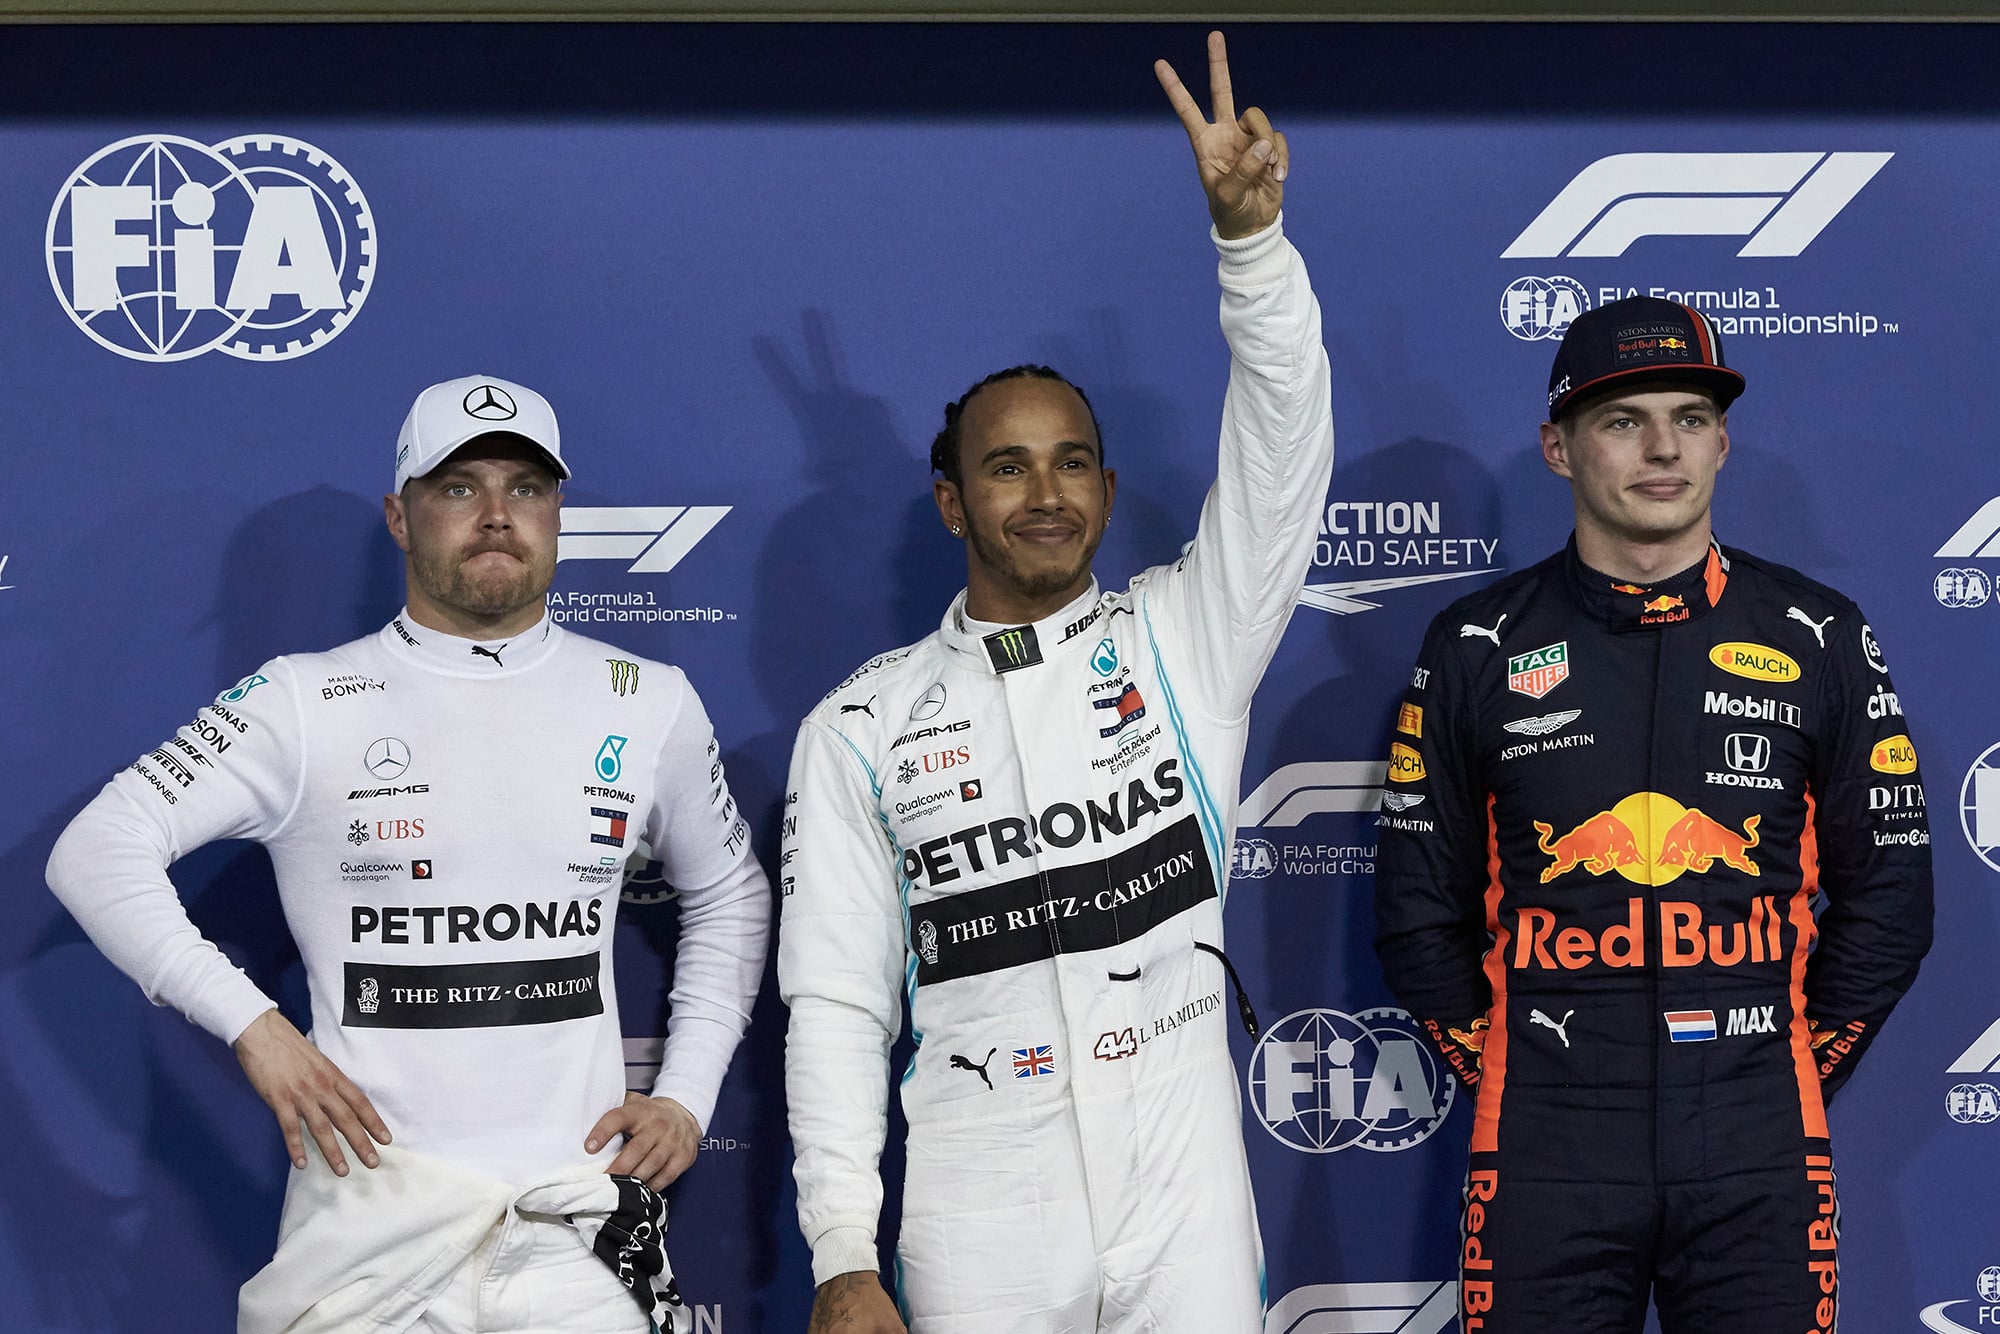 Hamilton, Bottas and Verstappen: the top 3 qualifiers at the 2019 Abu Dhabi F1 Grand Prix